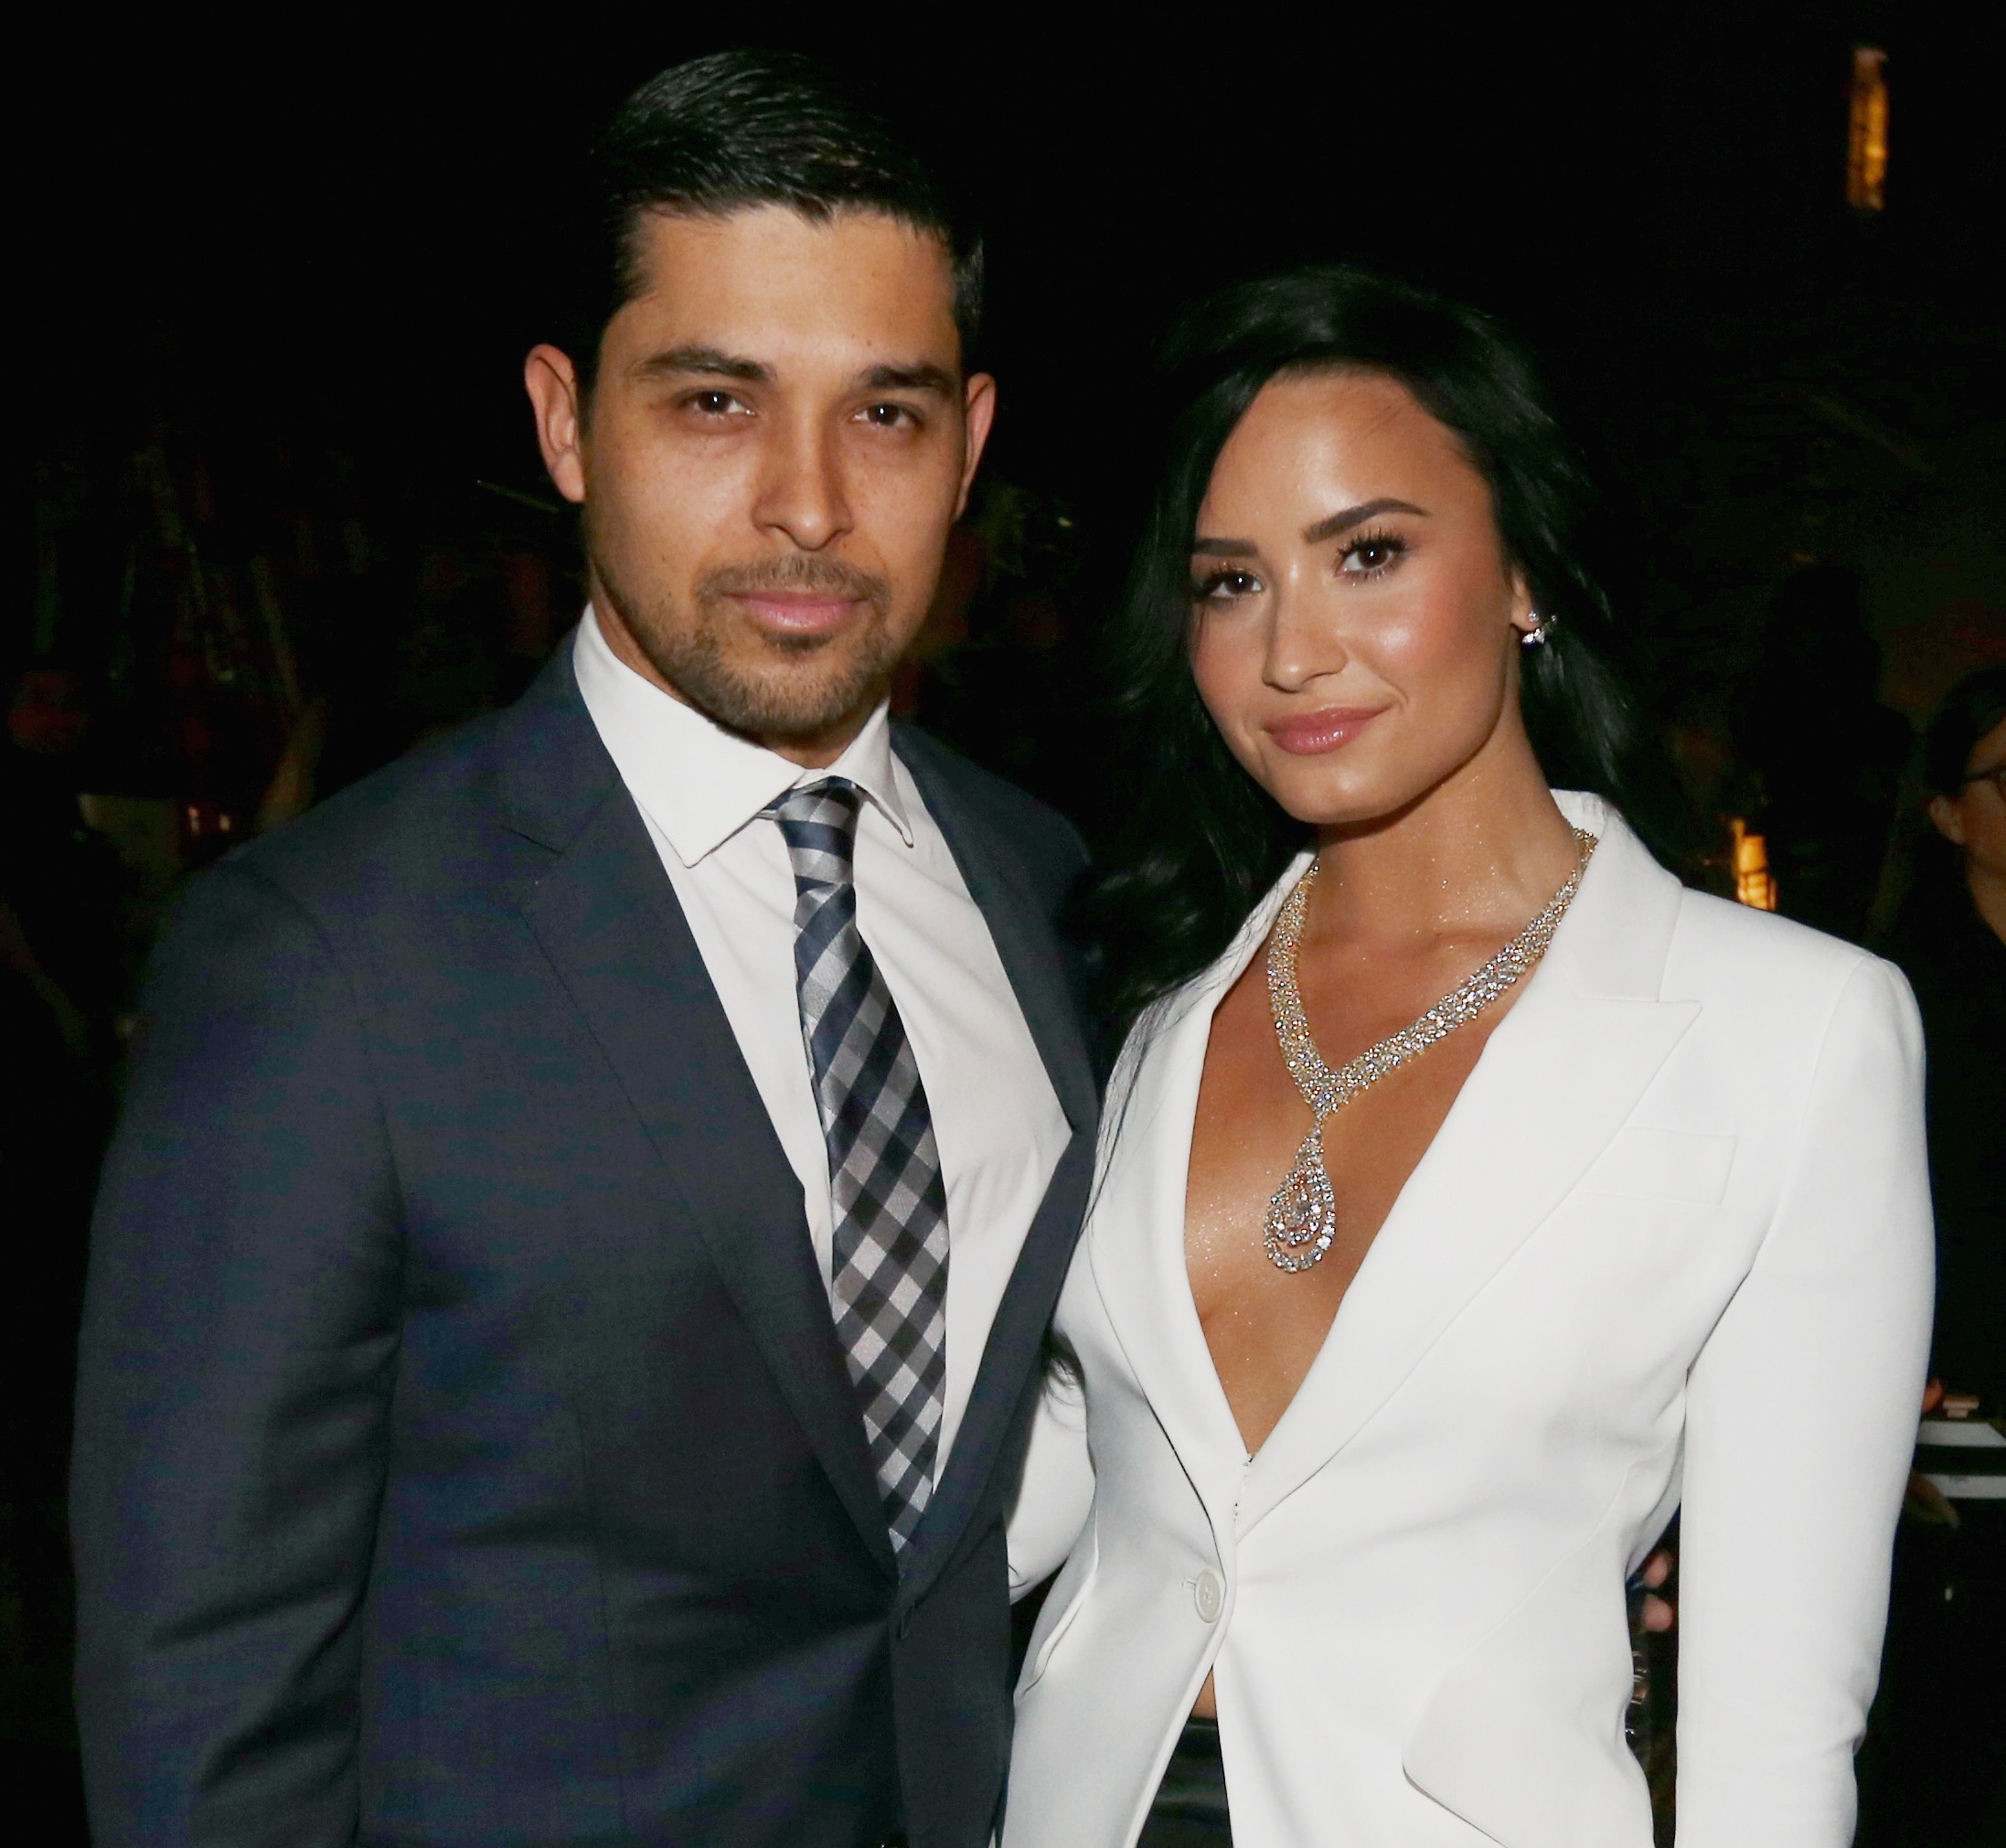 LOS ANGELES, CA - FEBRUARY 15: Actor Wilmer Valderrama (L) and singer Demi Lovato attend The 58th GRAMMY Awards at Staples Center on February 15, 2016 in Los Angeles, California. (Photo by Christopher Polk/Getty Images for NARAS)